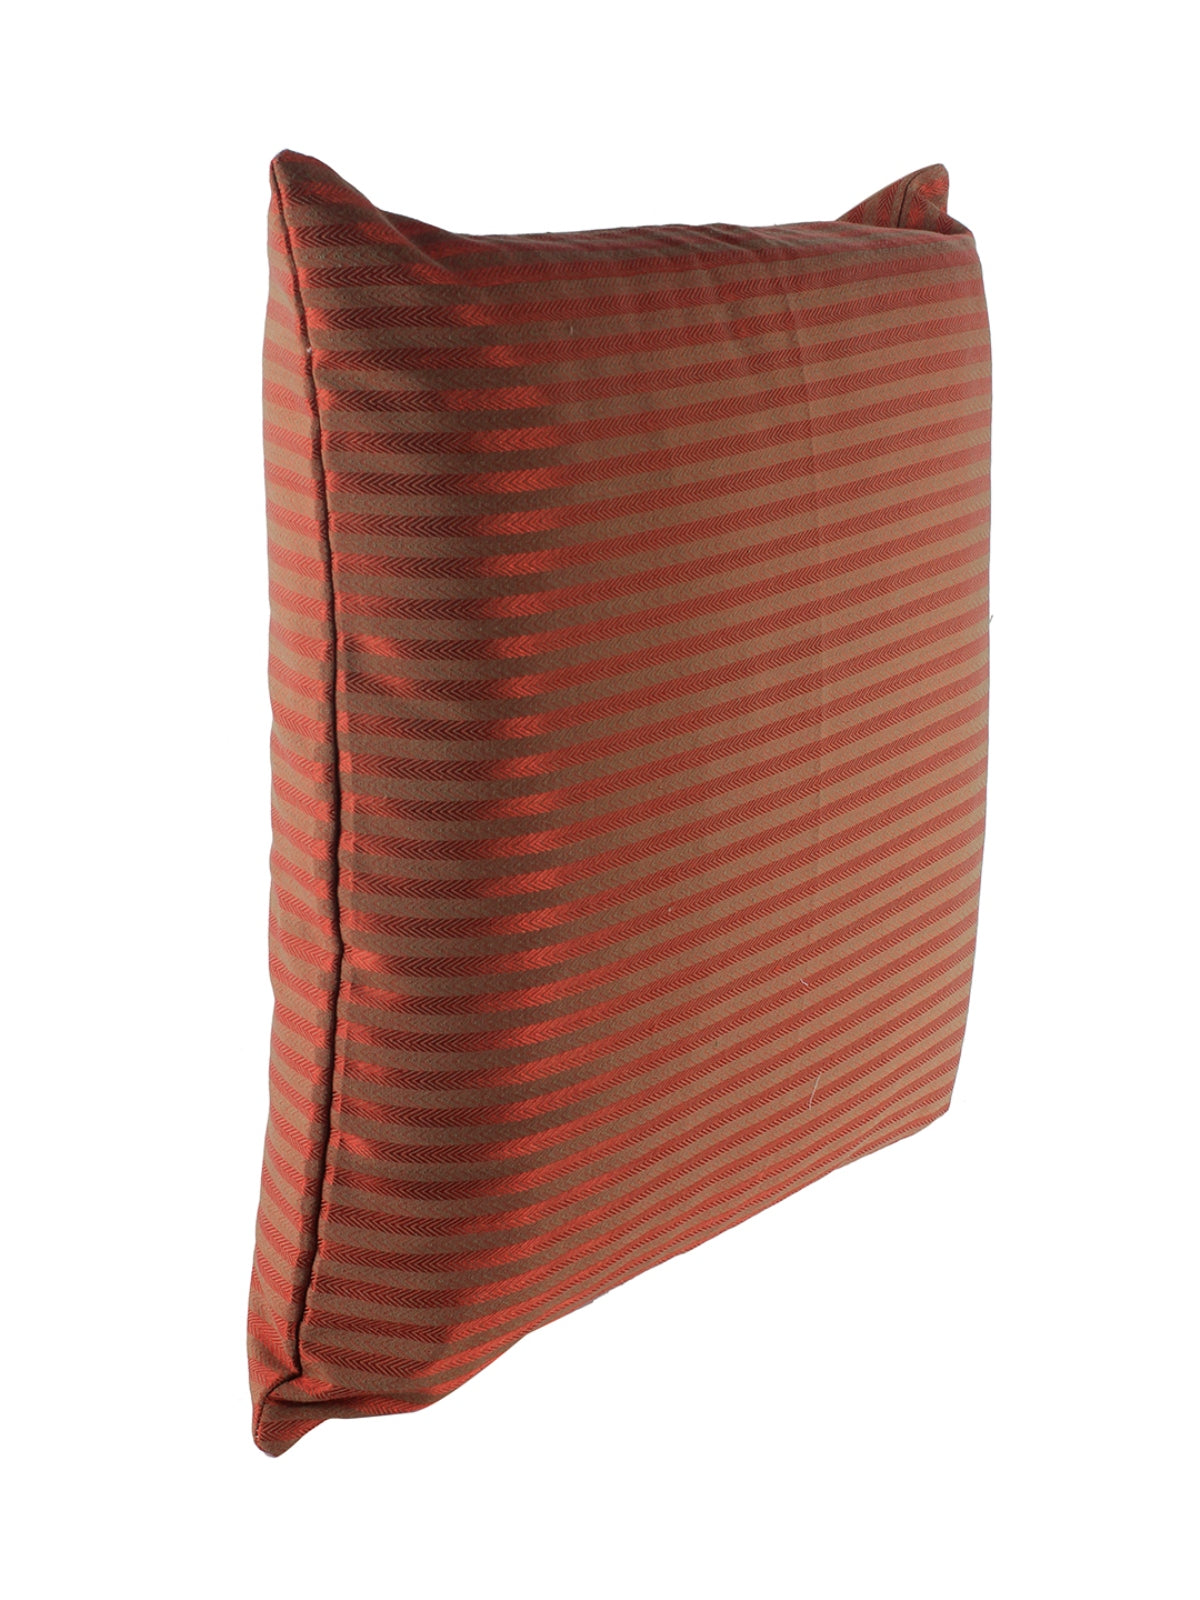 ROMEE Red Striped Printed Cushion Covers Set of 2